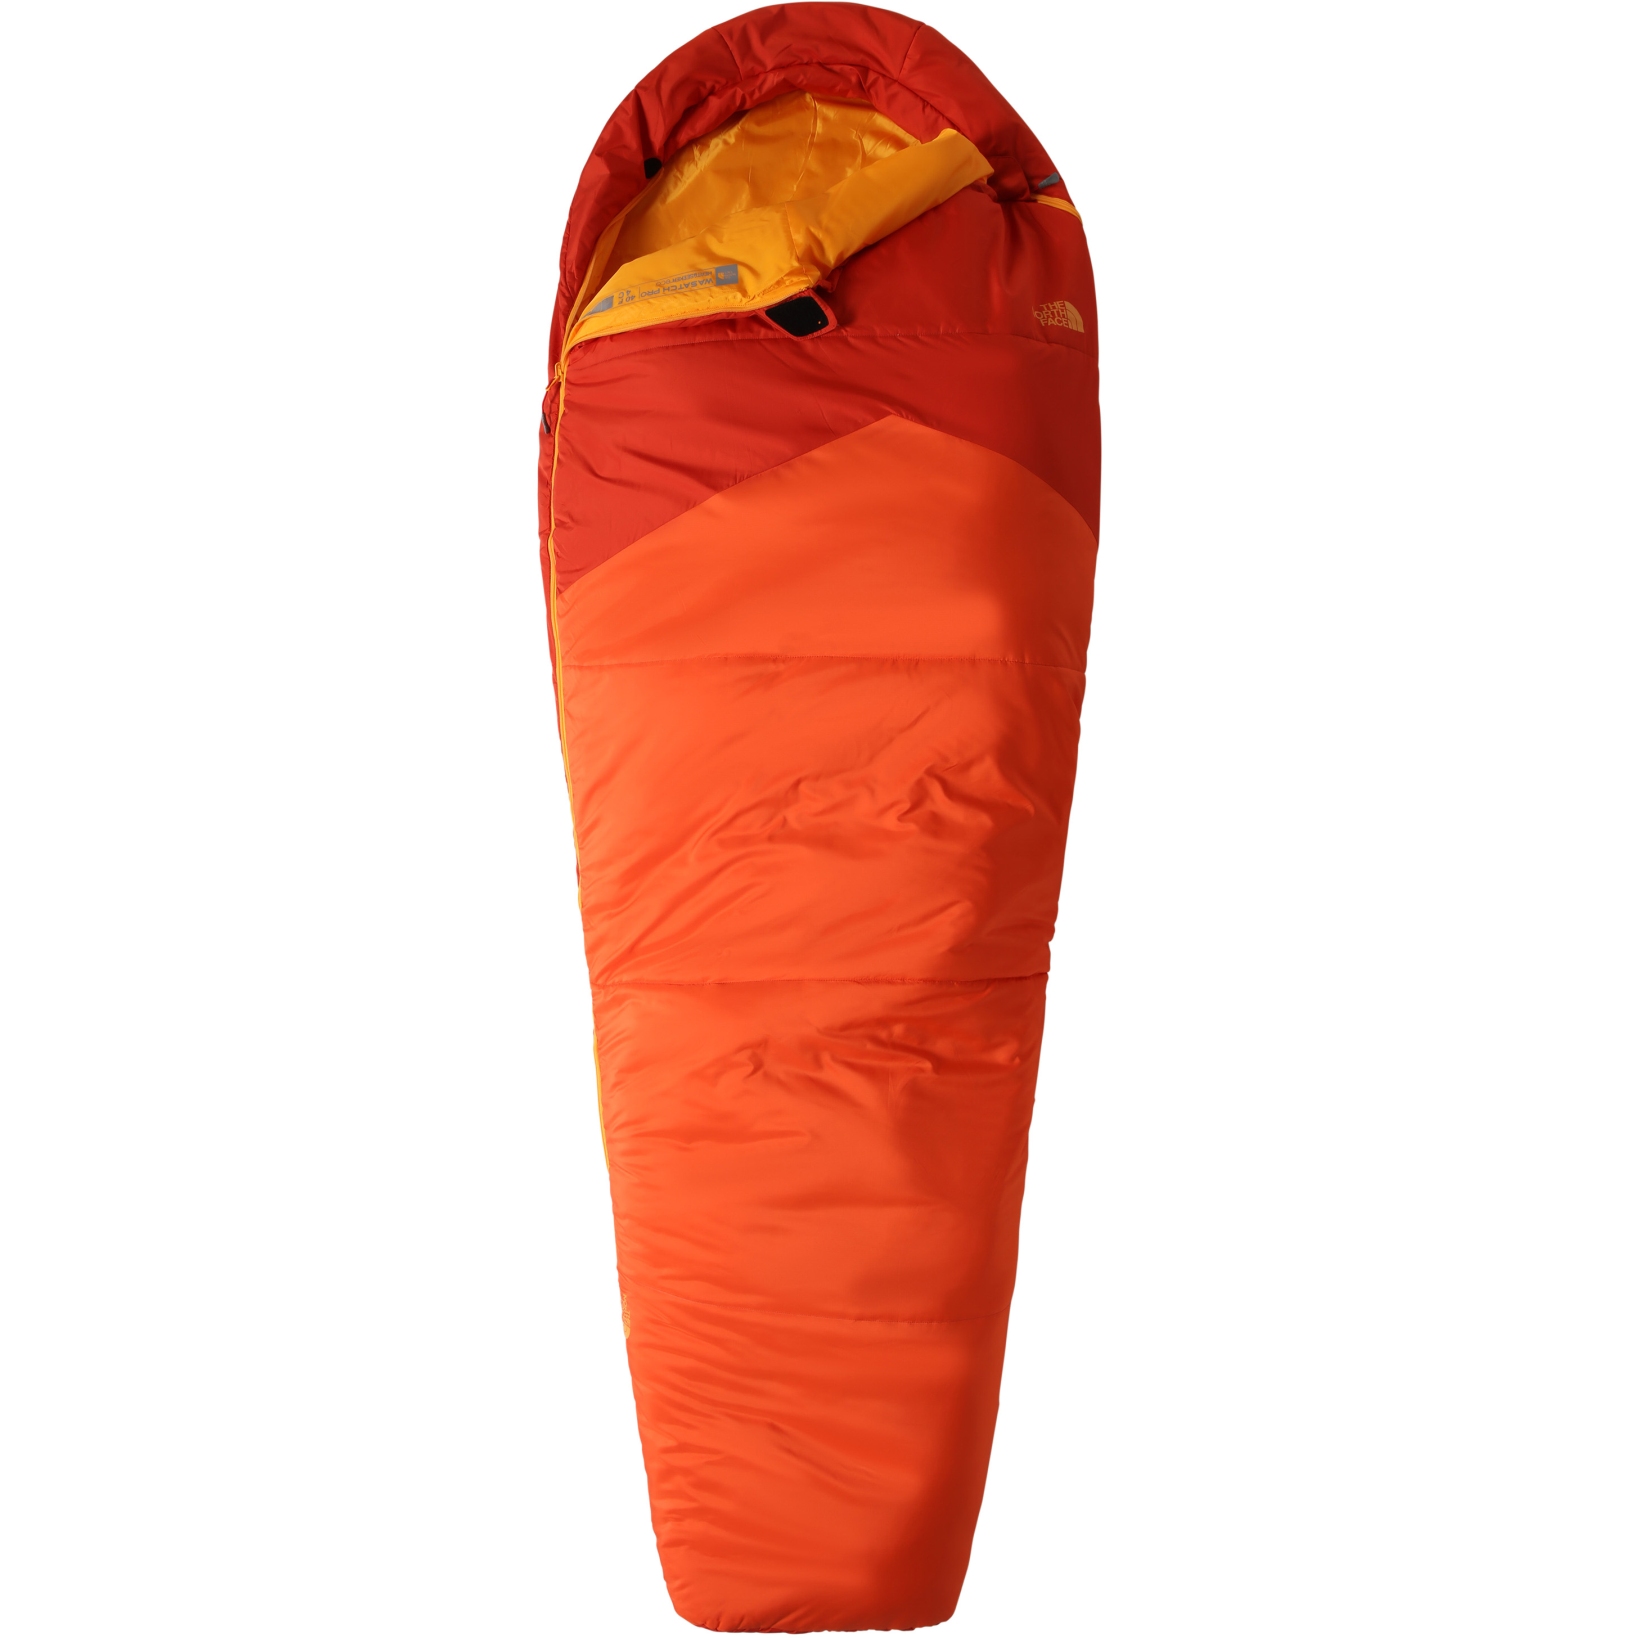 Picture of The North Face Wasatch Pro 4°C Sleeping Bag - Long - Right Zip - Zion Orange/Persian Orange